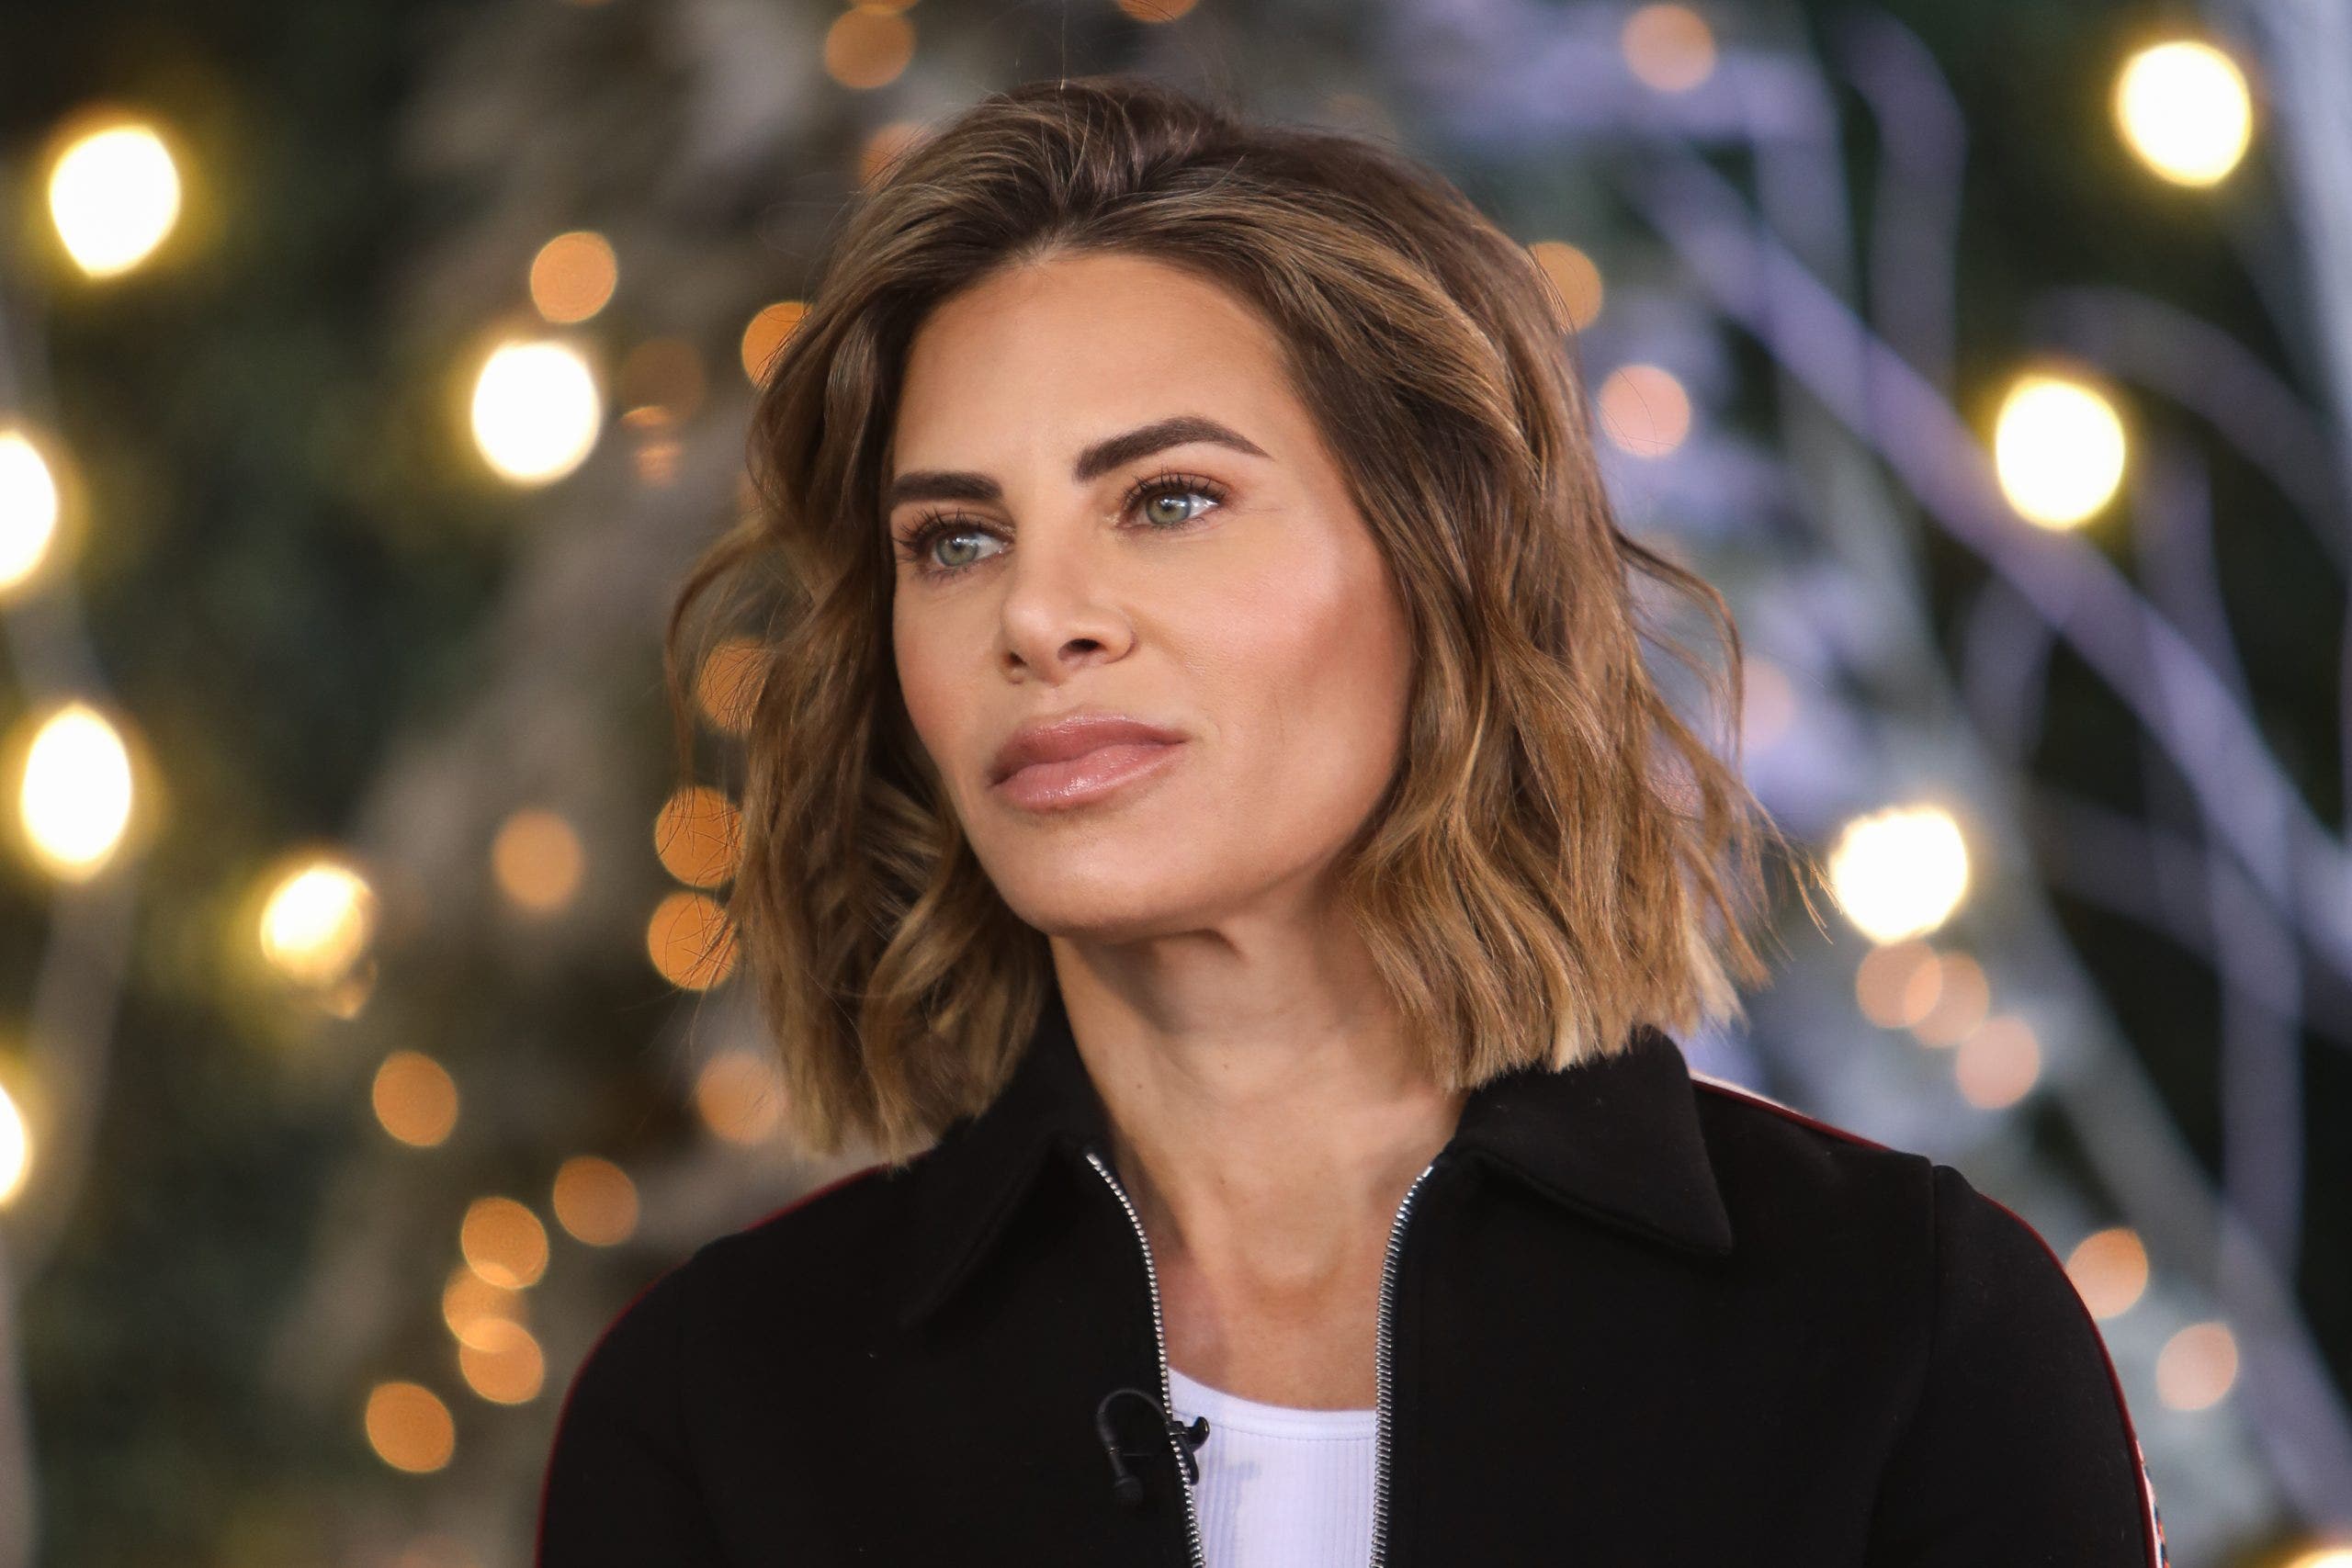 Jillian Michaels says evidence ‘irrefutable,’ trans athletes should not compete against girls [Video]